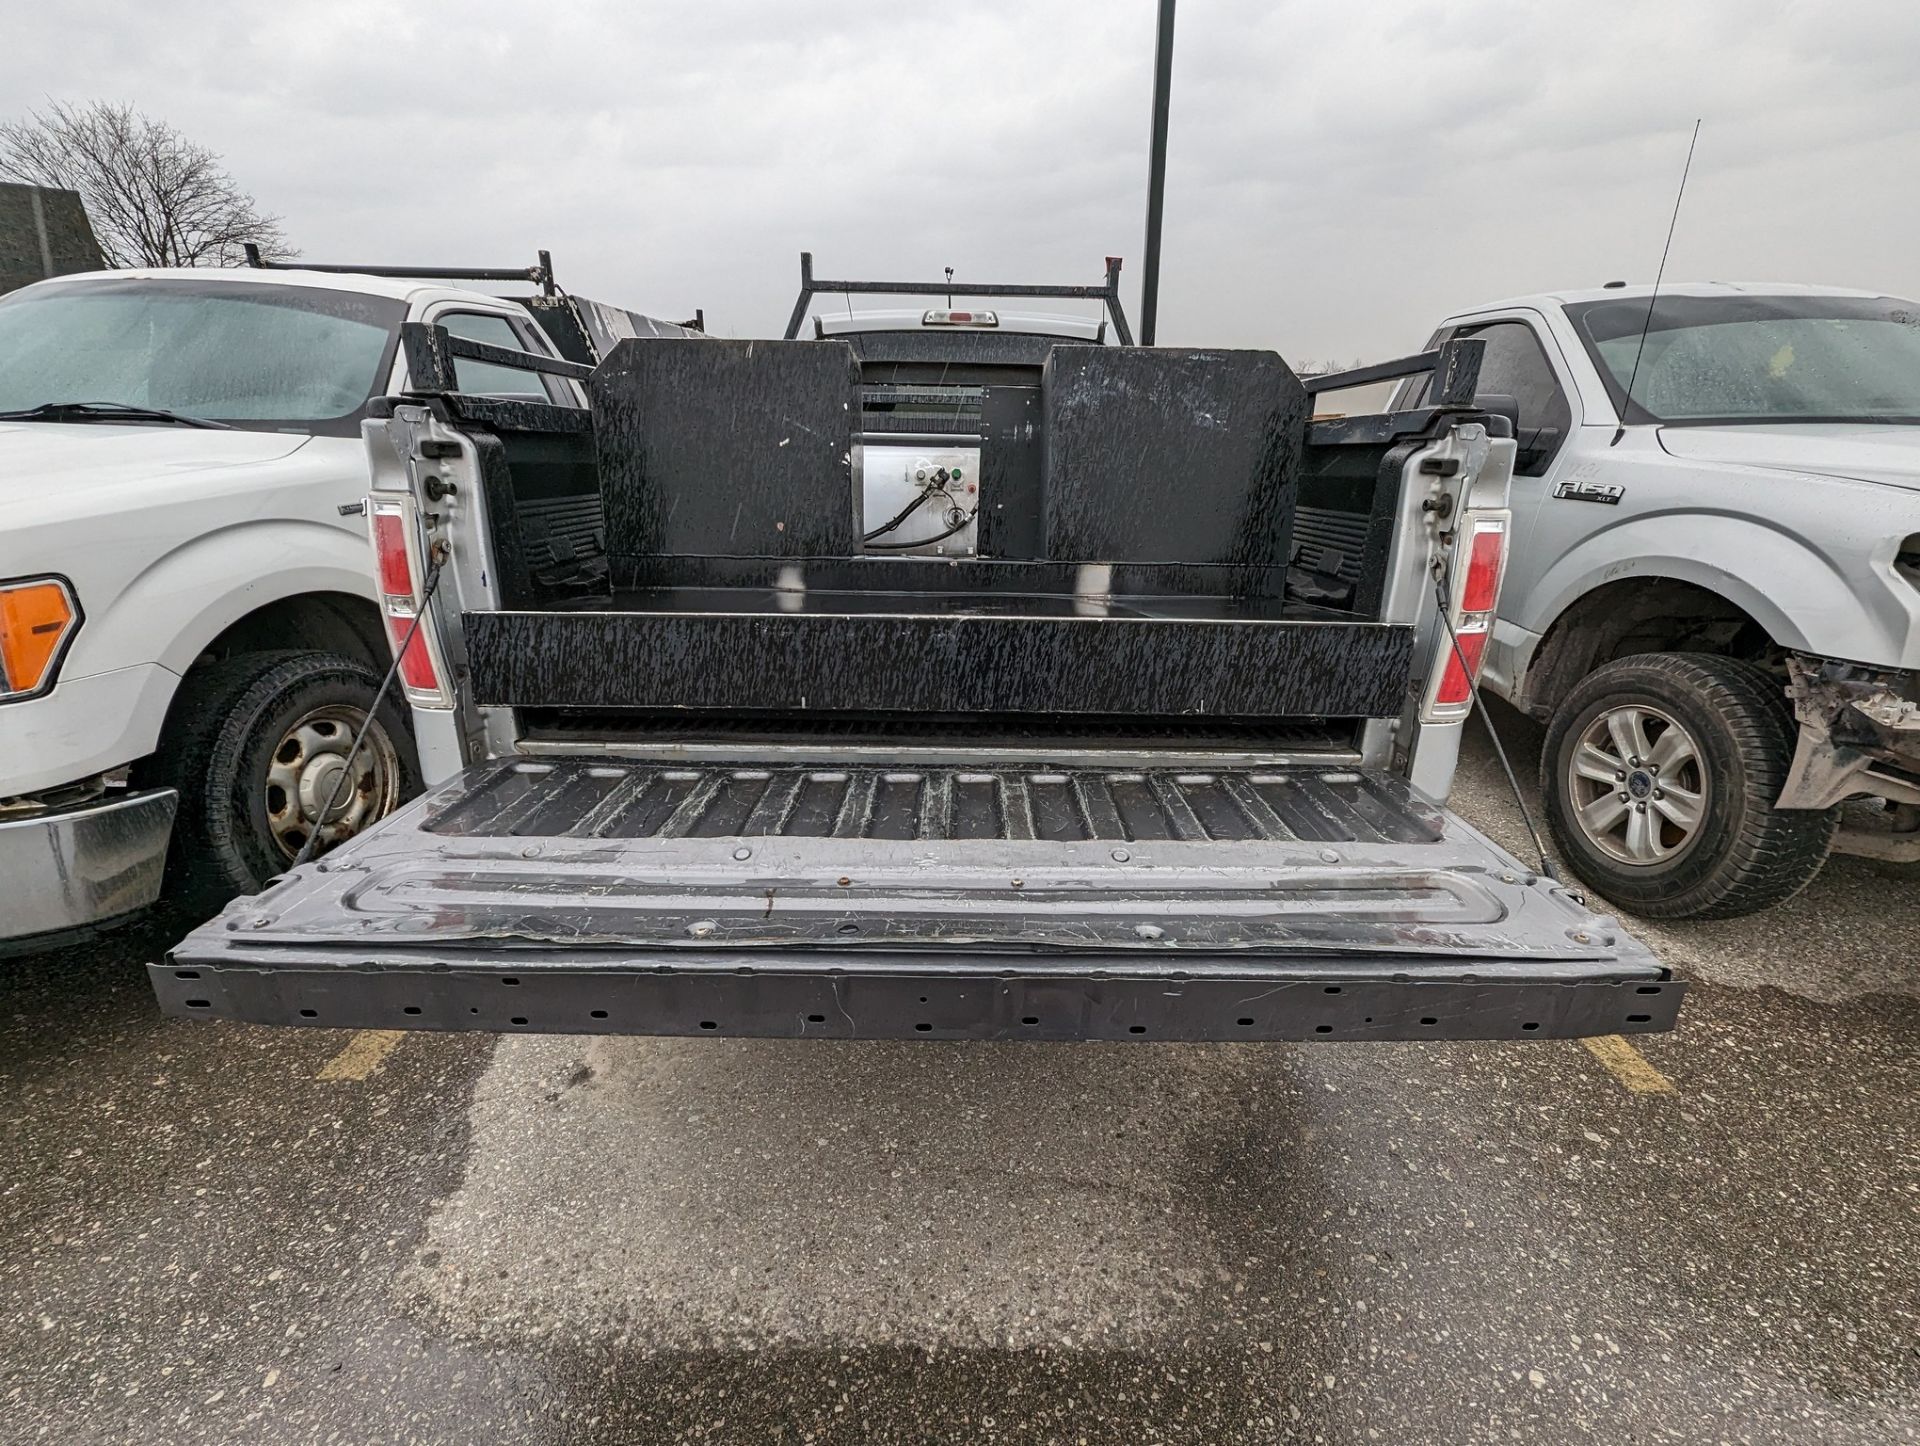 2014 FORD F150 XLT PICKUP TRUCK, VIN# 1FTNF1CF2EKG16322, APPROX. 275,754KMS (NO BLACK TOOL BOXES) - Image 5 of 10